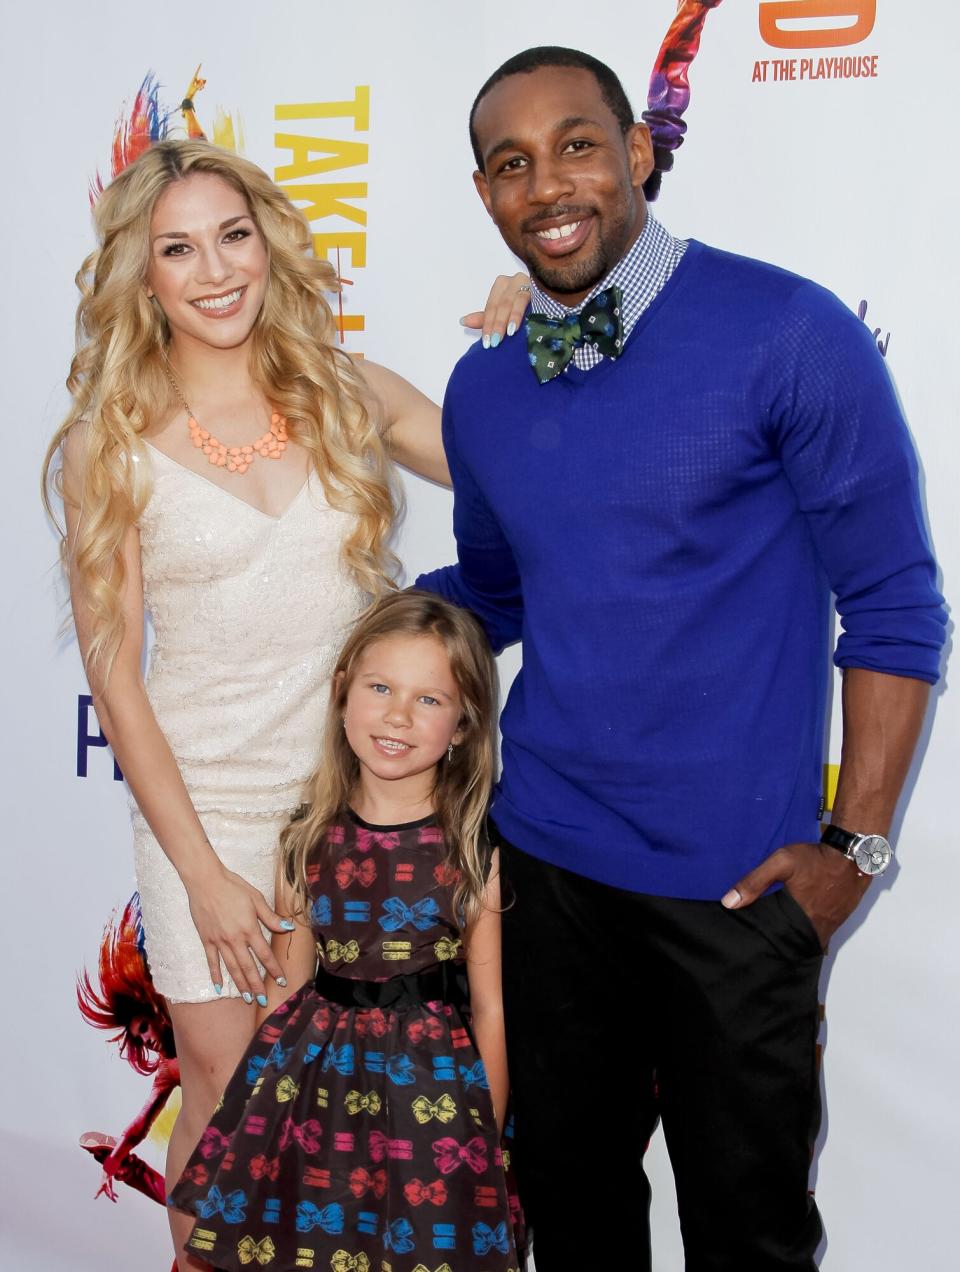 Allison Holker, Weslie Fowler and Stephen Boss attend the Pasadena Playhouse's premiere gala at Pasadena Playhouse on May 4, 2014 in Pasadena, California.